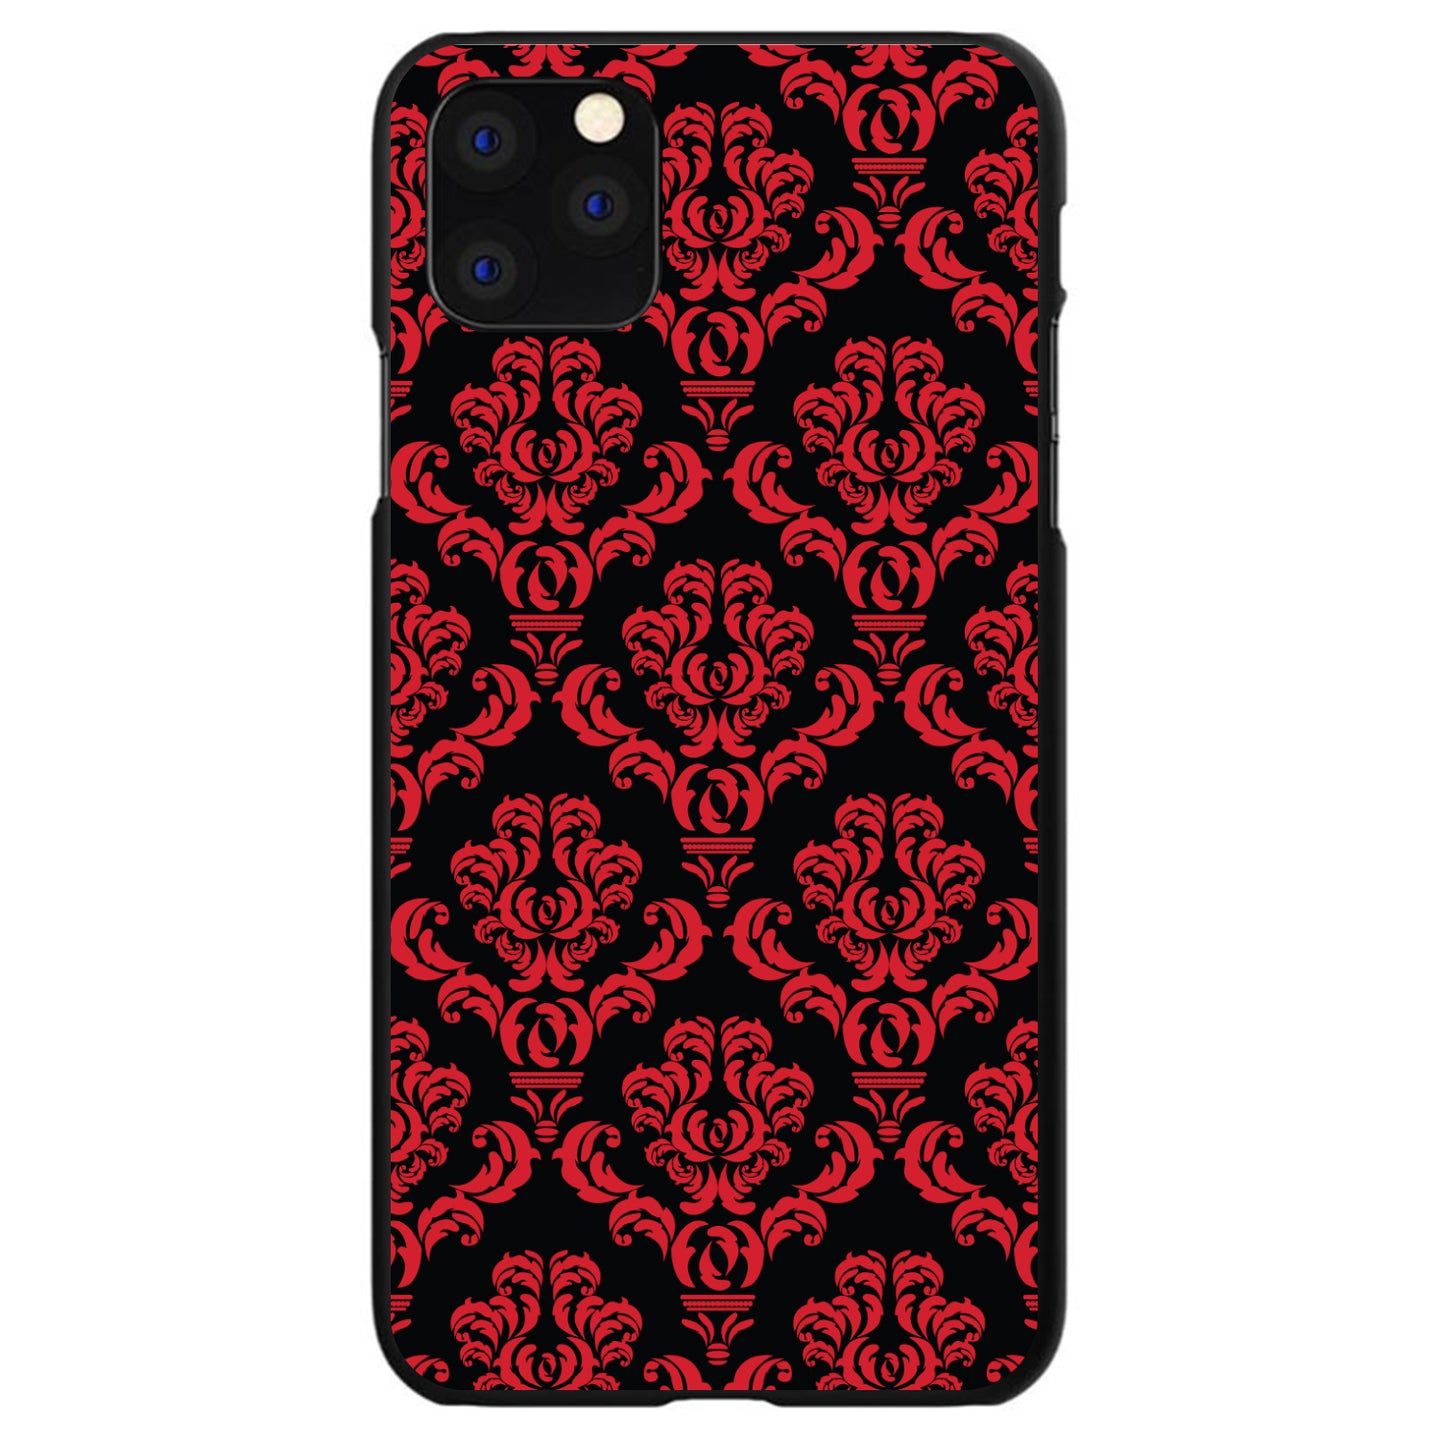 DistinctInk® Hard Plastic Snap-On Case for Apple iPhone or Samsung Galaxy - Black Red Damask Pattern